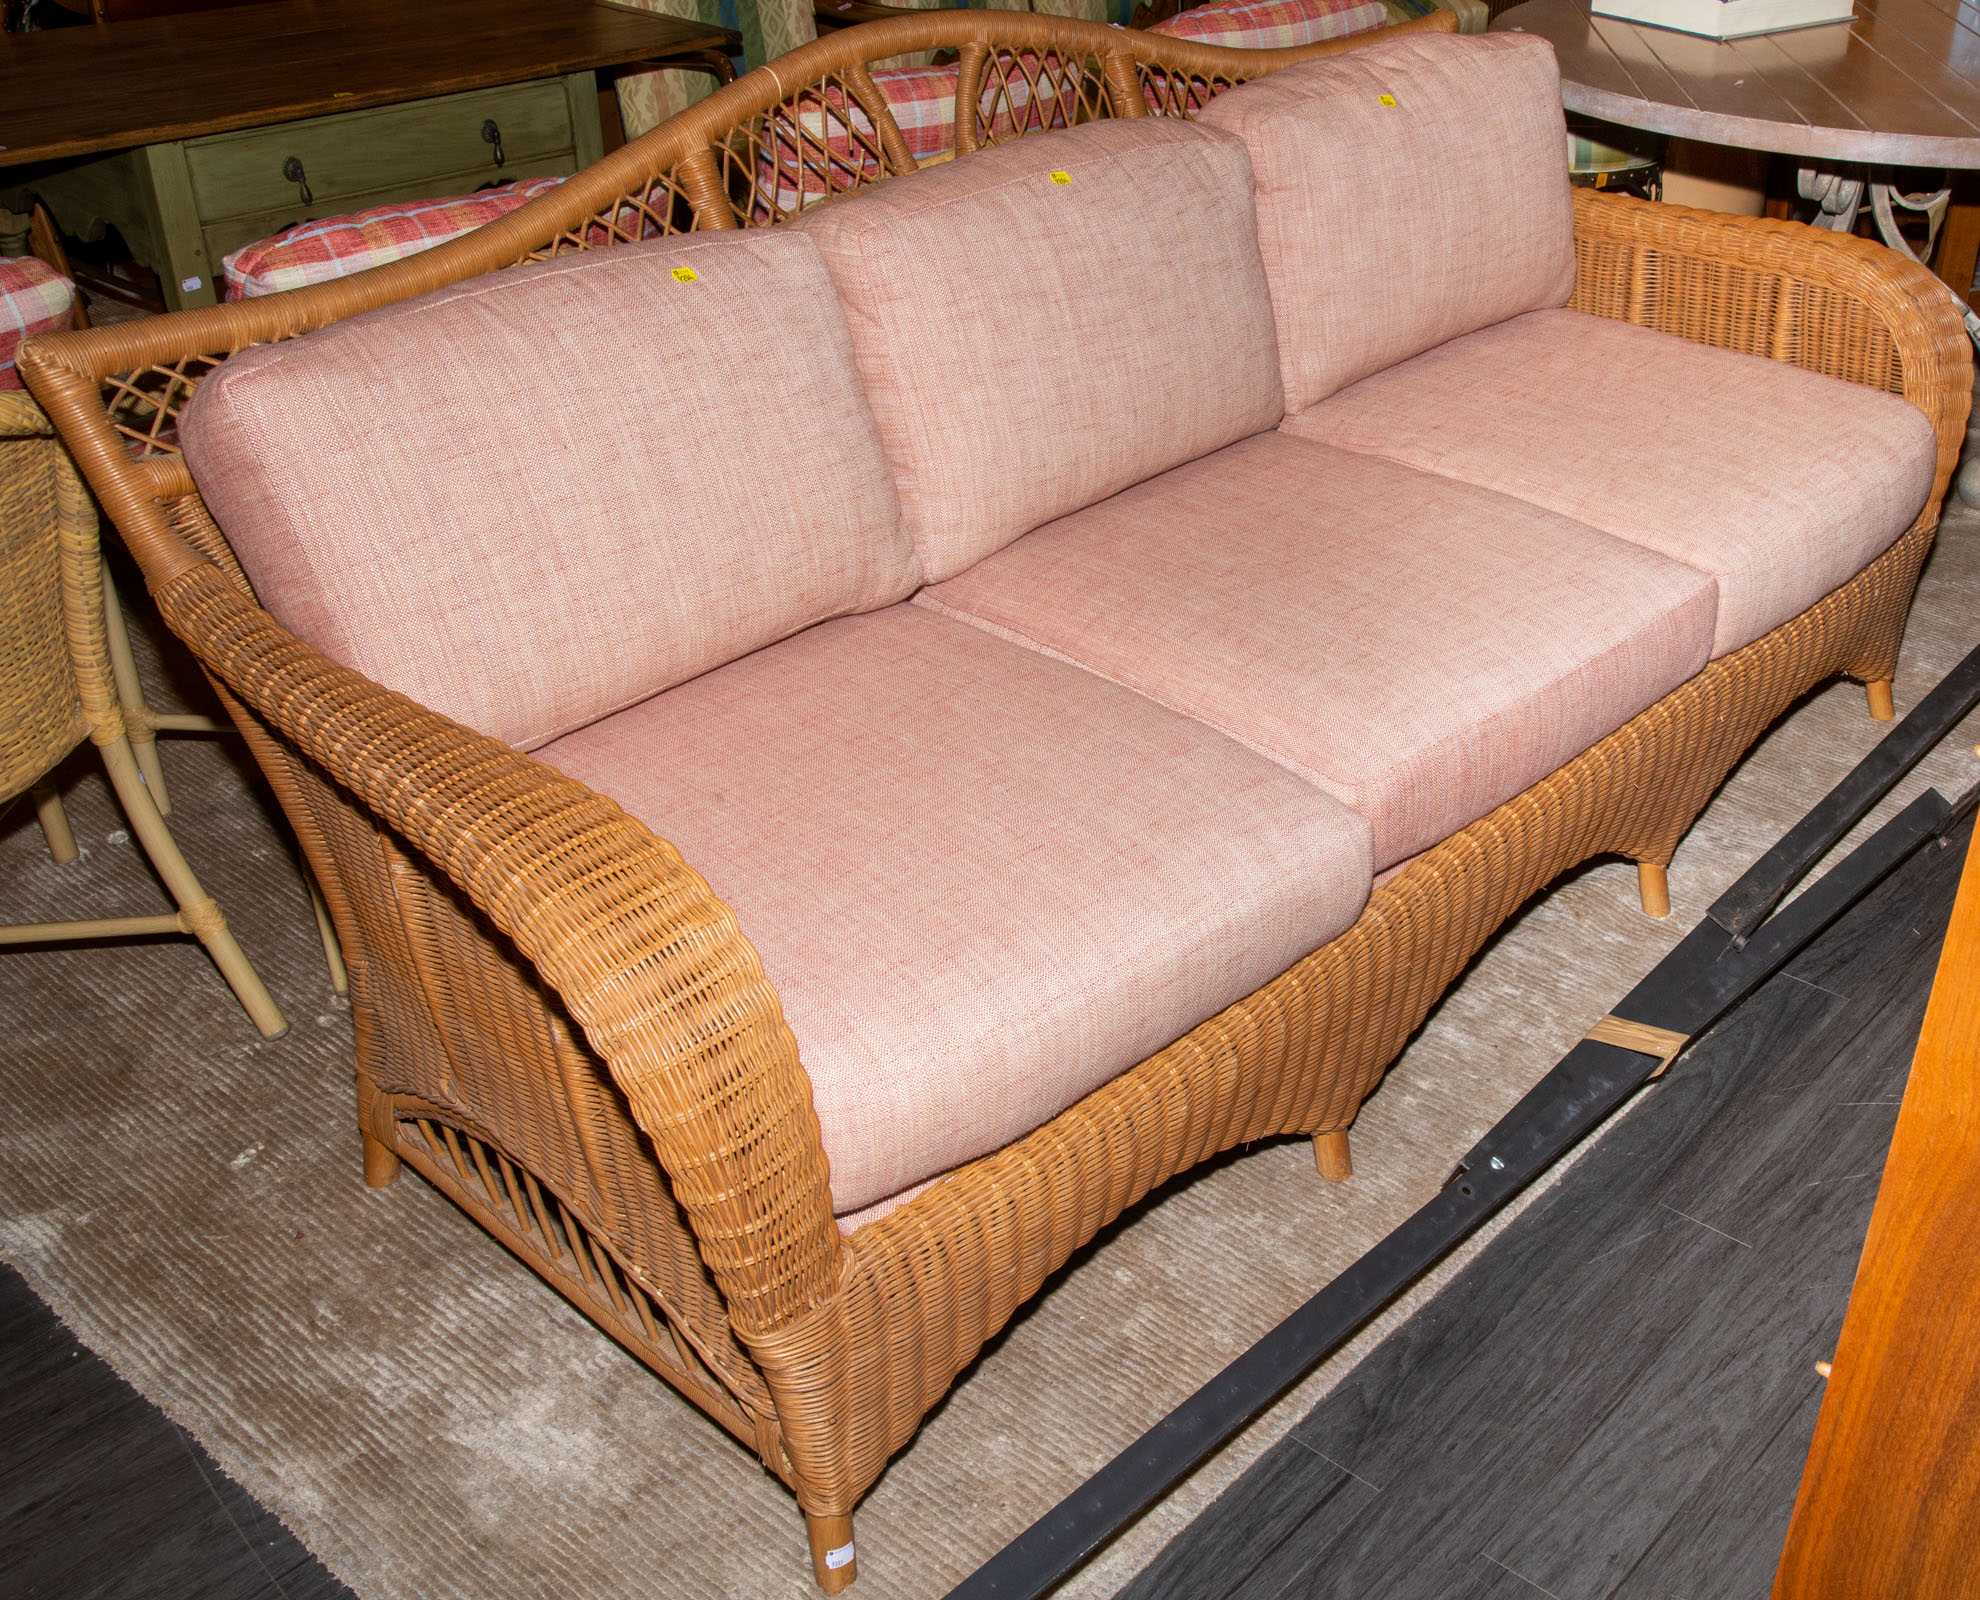 A WICKER SOFA Contemporary with 3344af